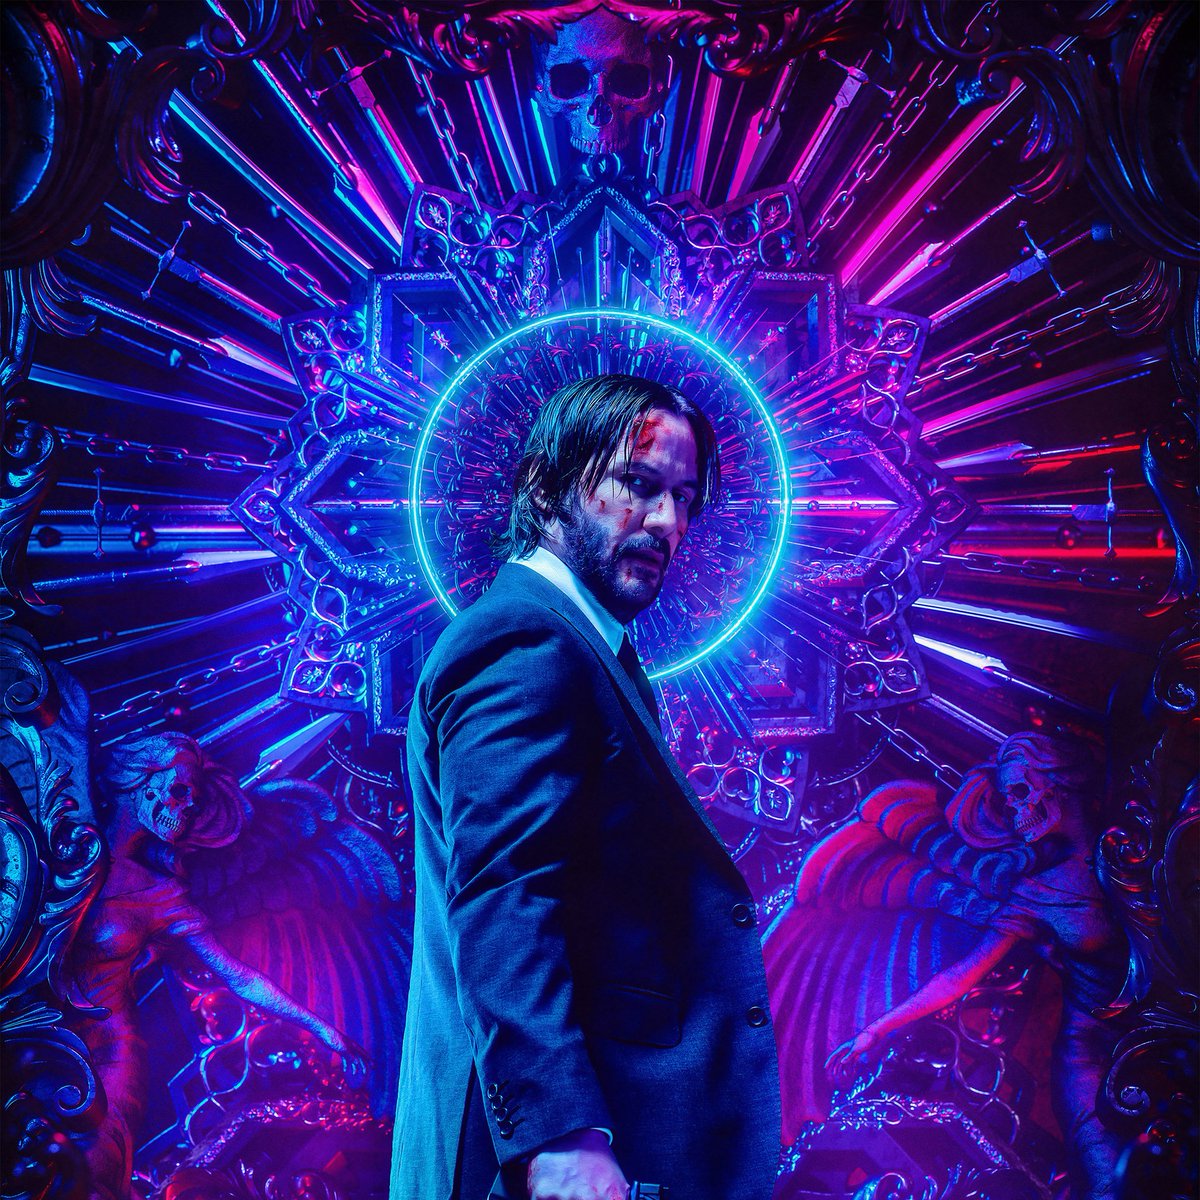 Billelis has done stunning work on a wide variety of media, sport, game, and pop culture projects.Lionsgate approached him to create artwork for John Wick 3. He produced this beauty, incorporating "metallic roses, weapons, angels of death and his beloved late puppy"